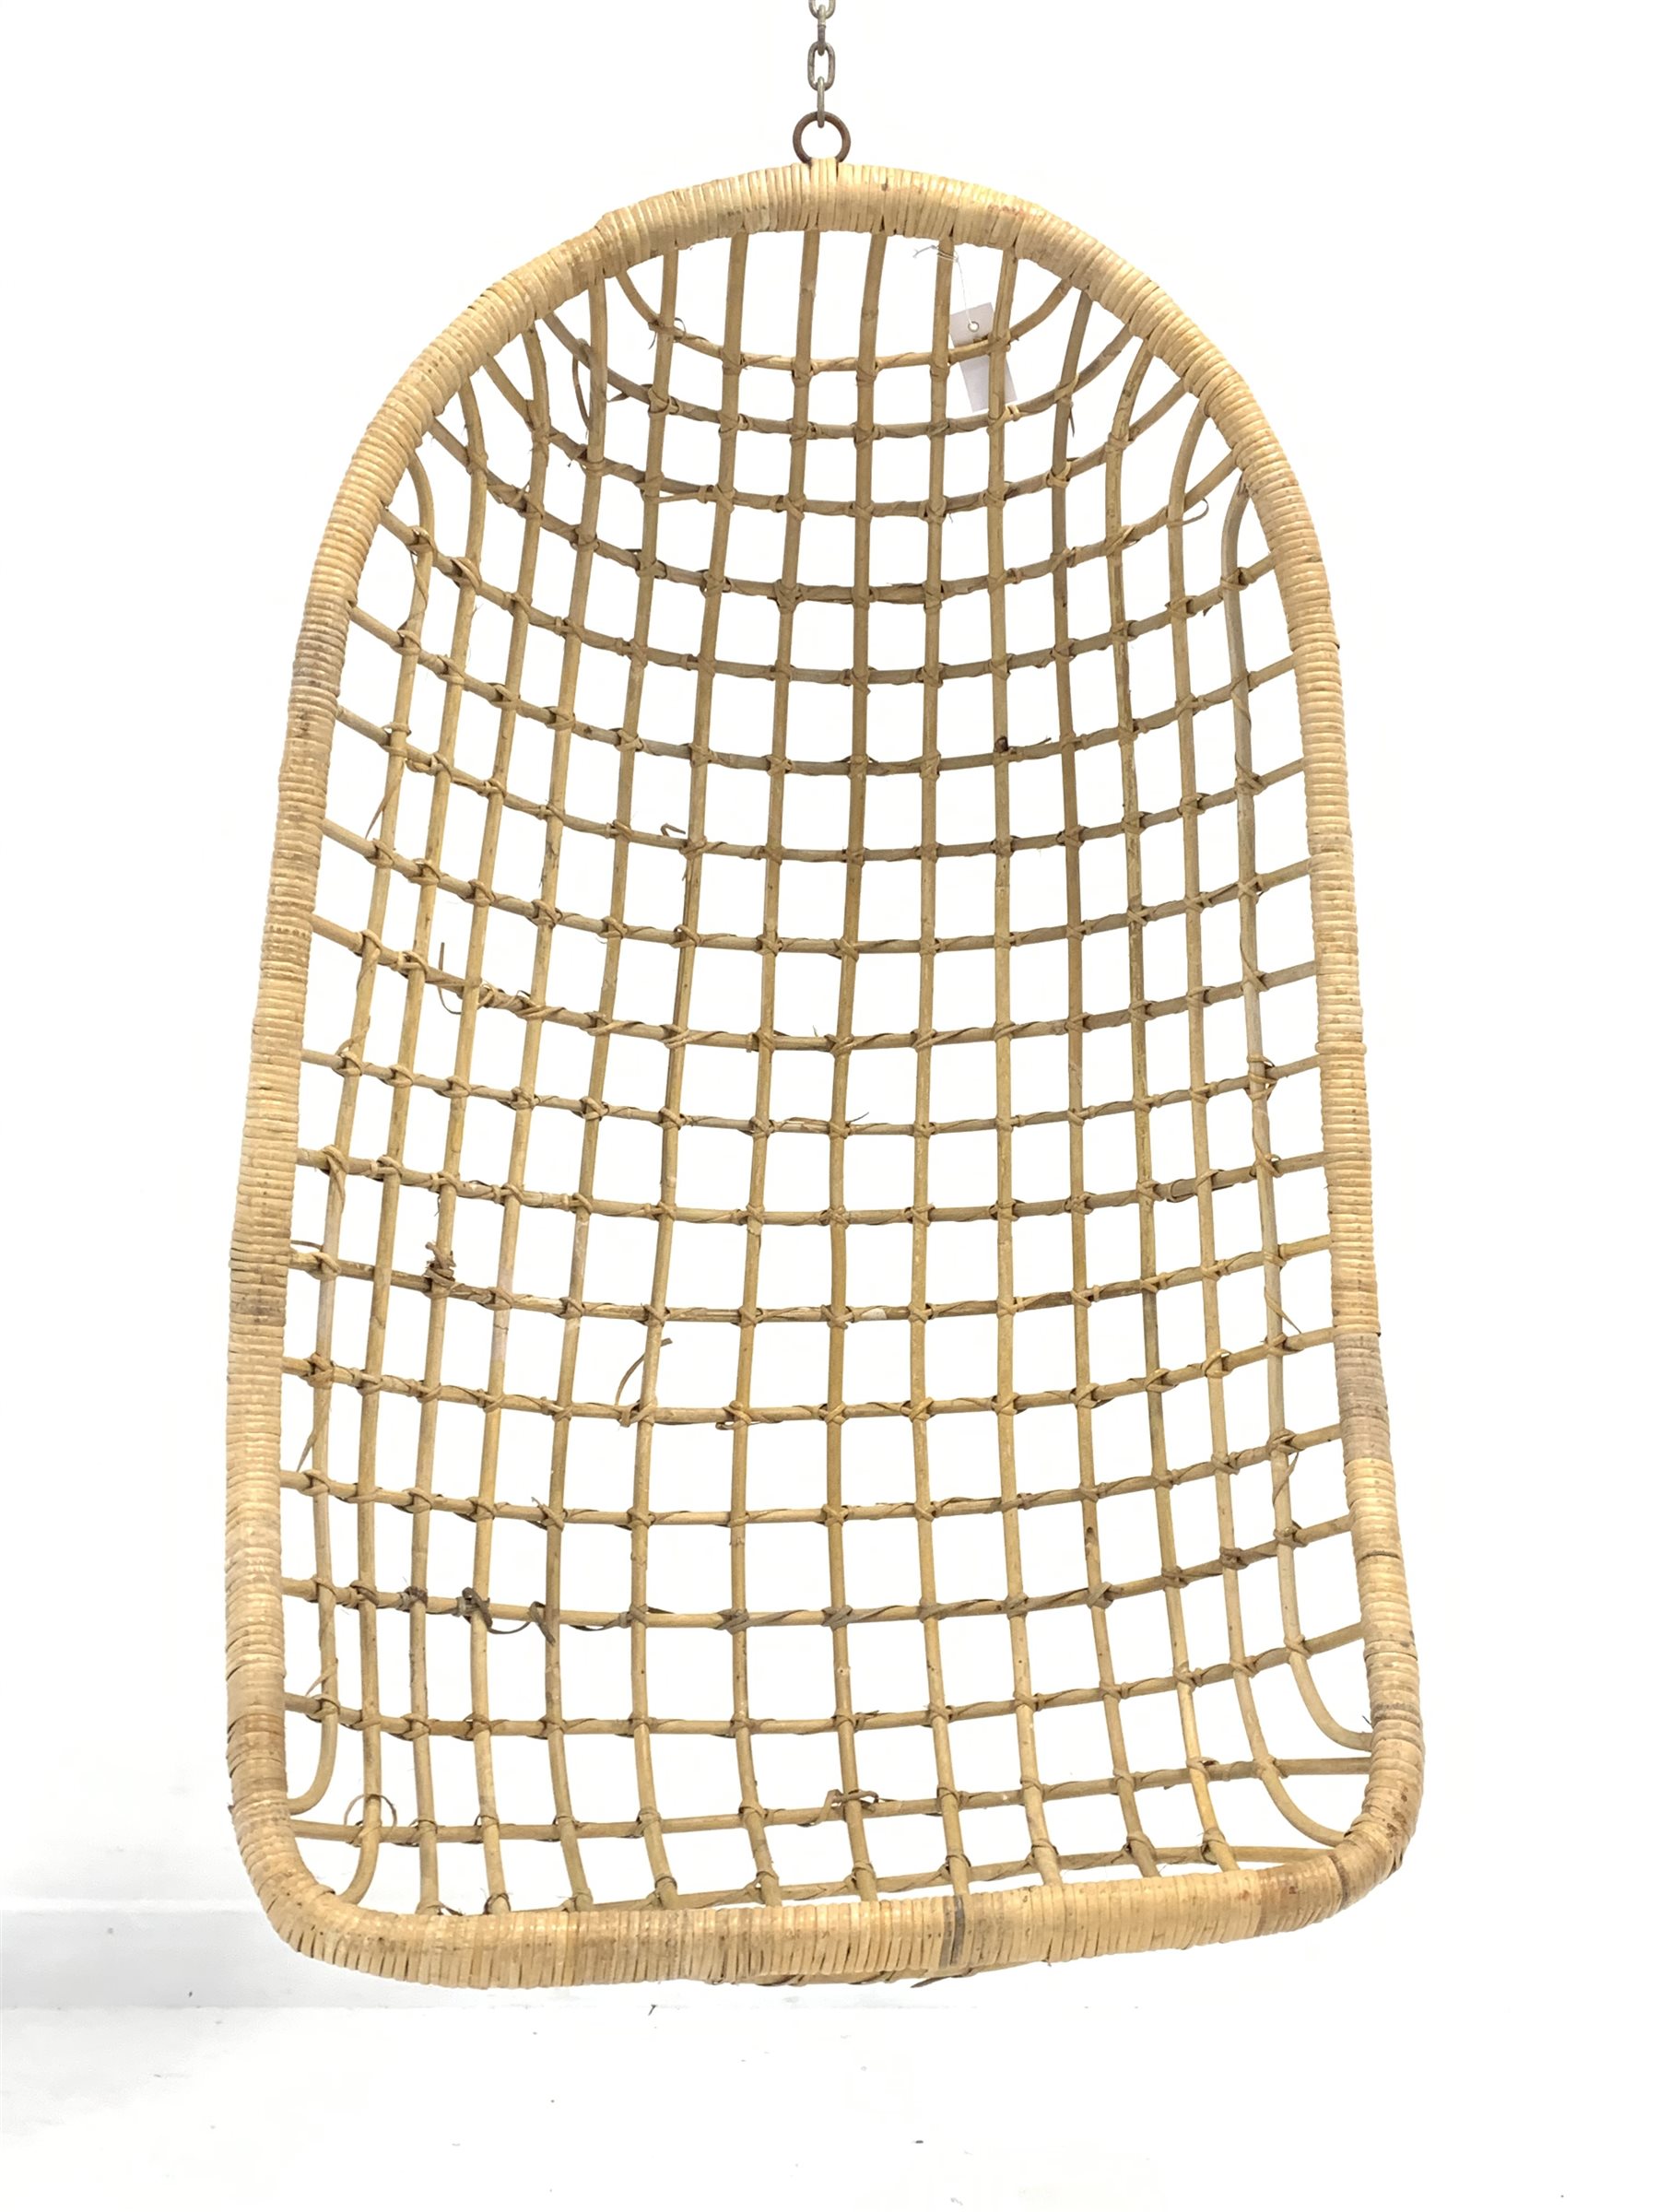 1960s Hanging basket weave chair, W72cm - Image 3 of 3